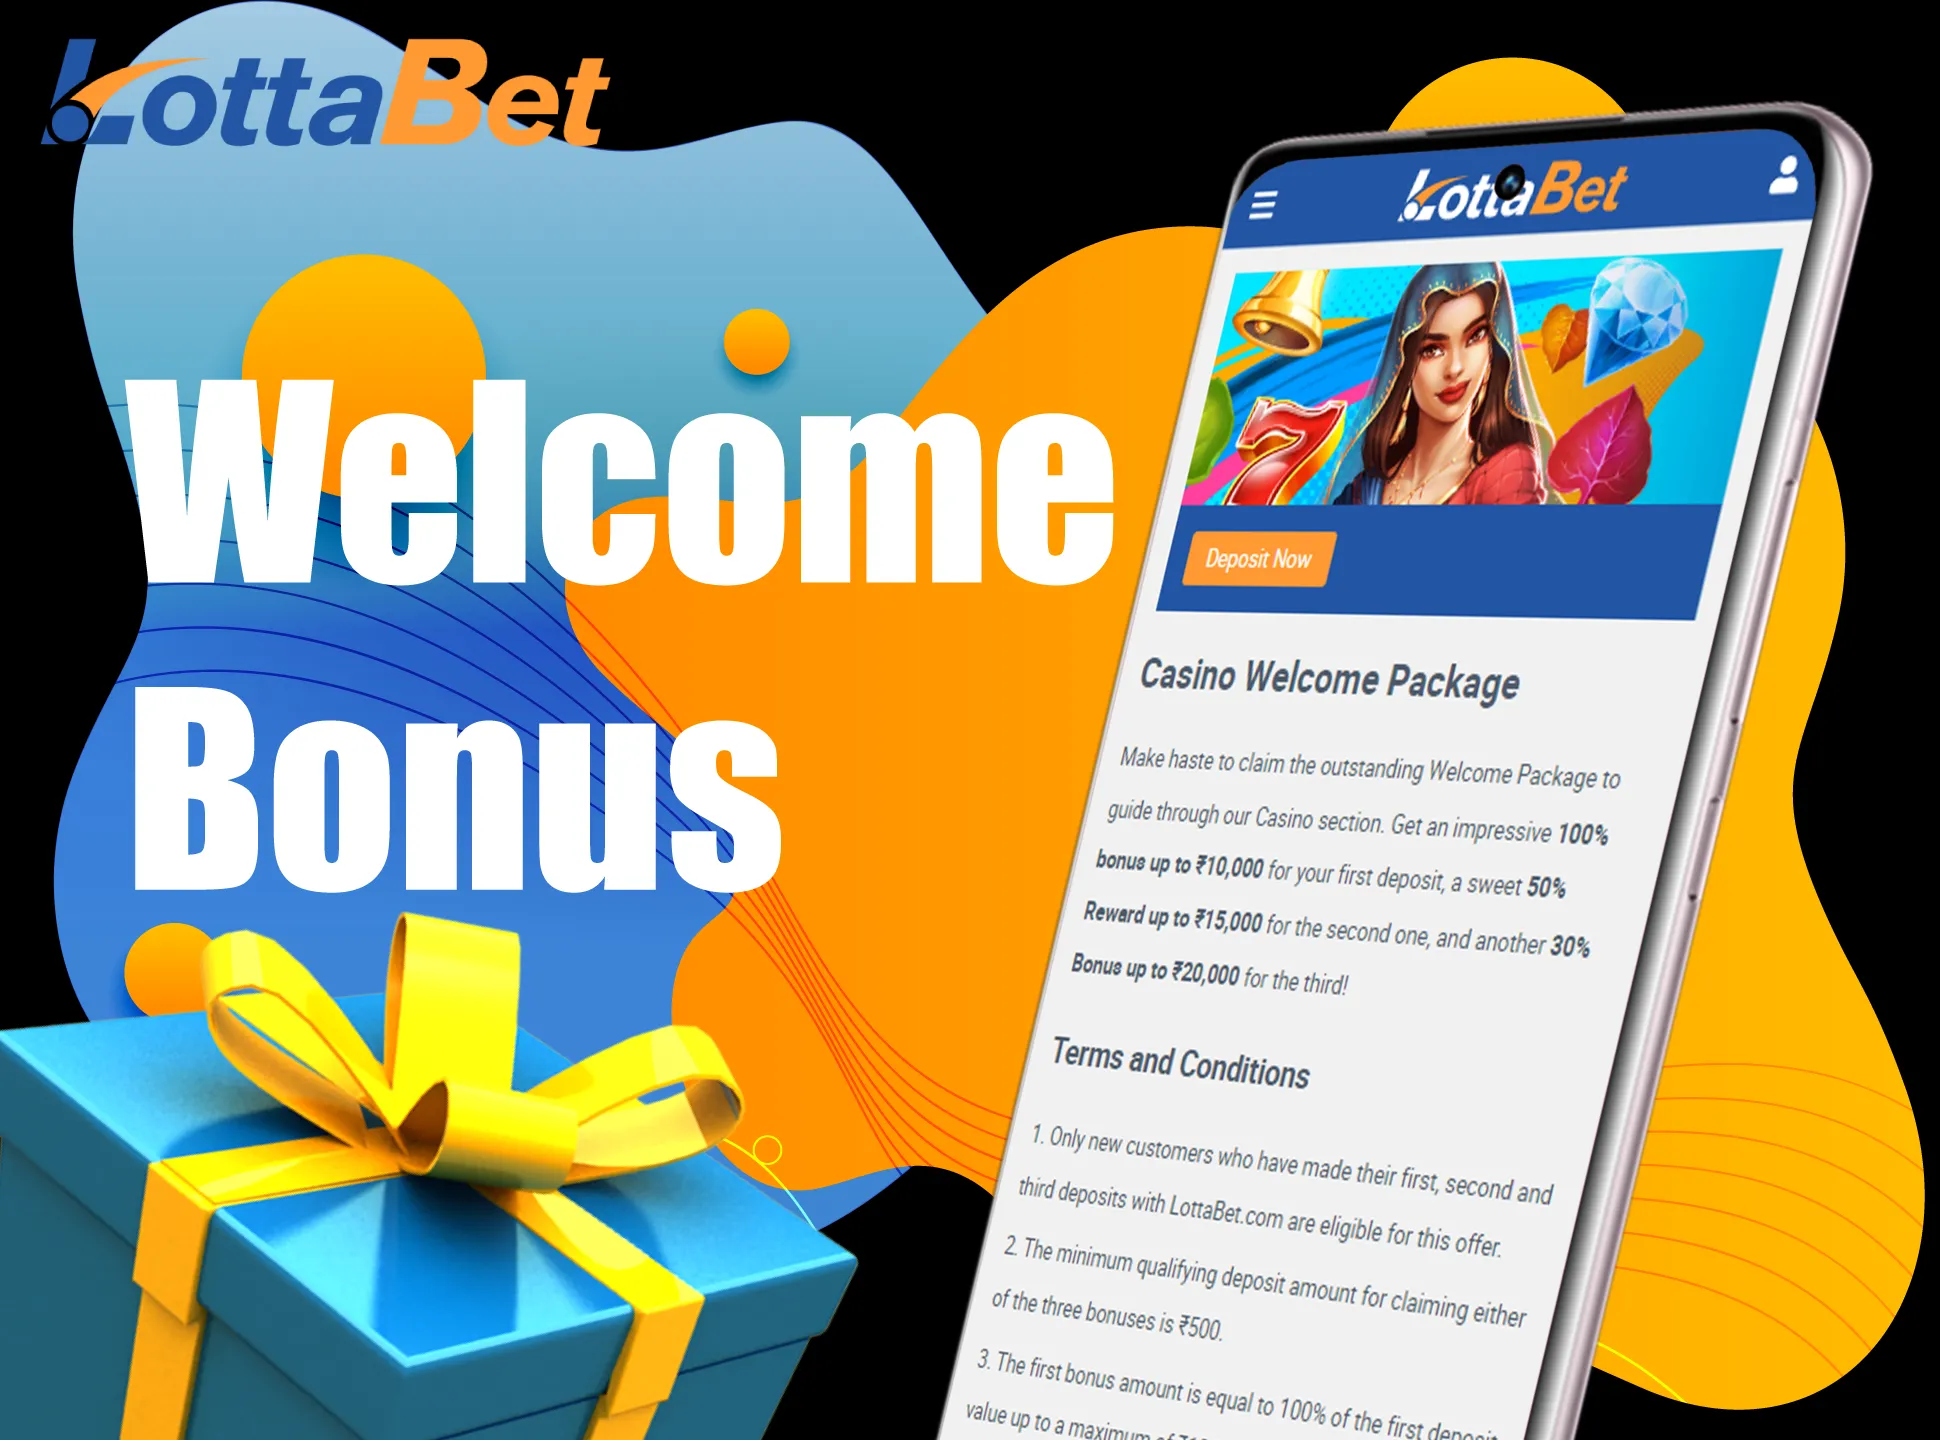 You get the Lottabet welcome bonus right after the first deposit.